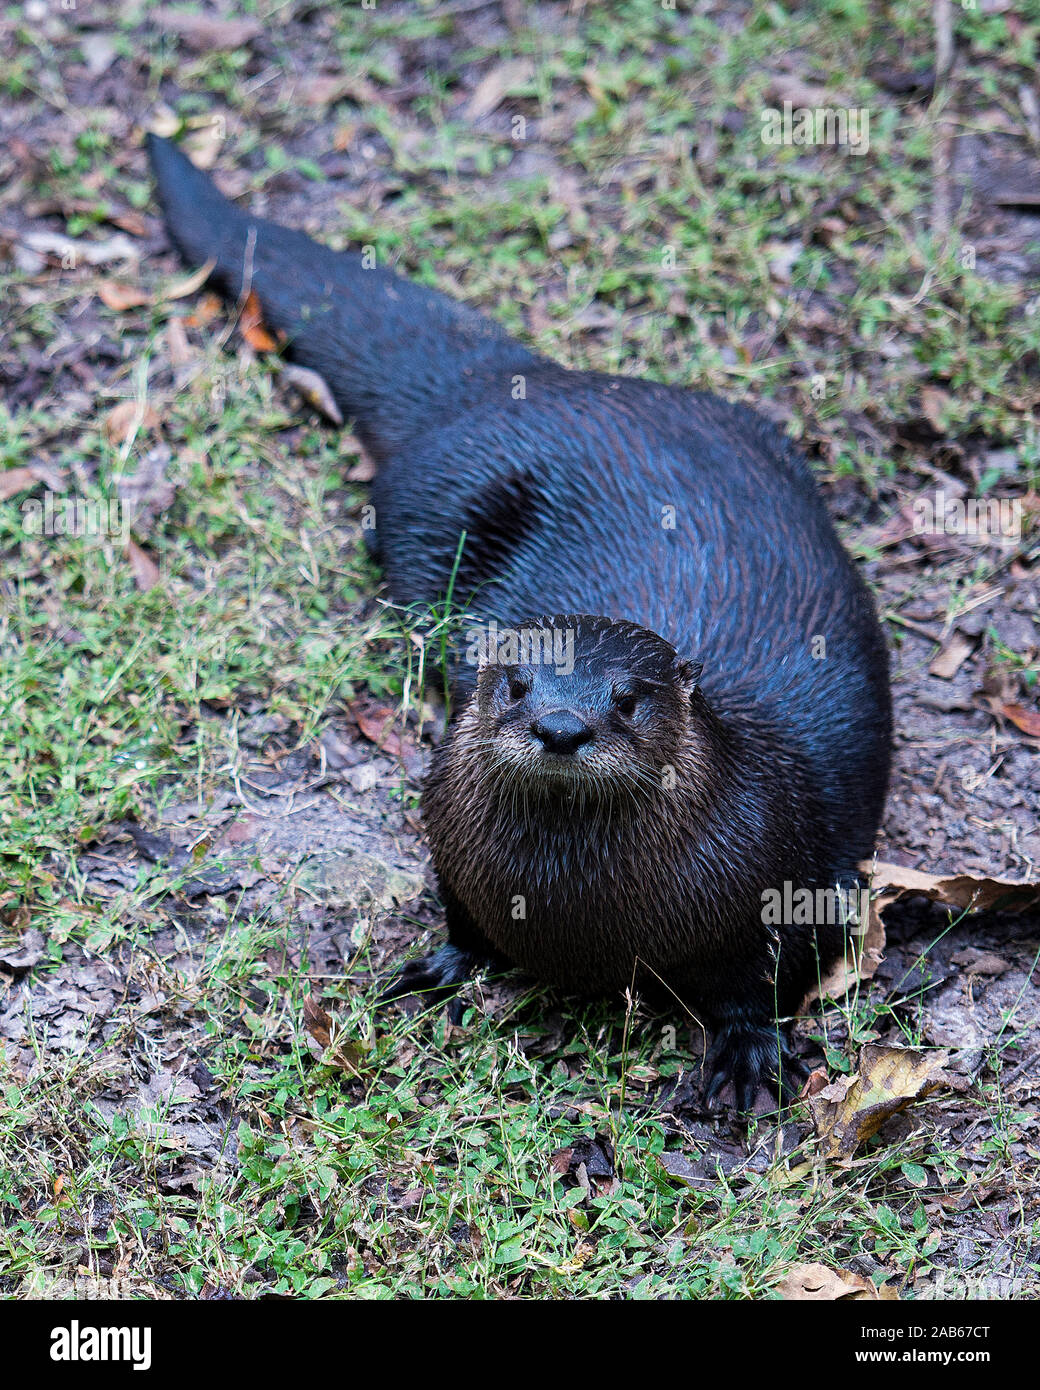 Otter animal out of water exposing its body, head, eye, nose, paws, tail, wet fur in  its surrounding and environment. Stock Photo